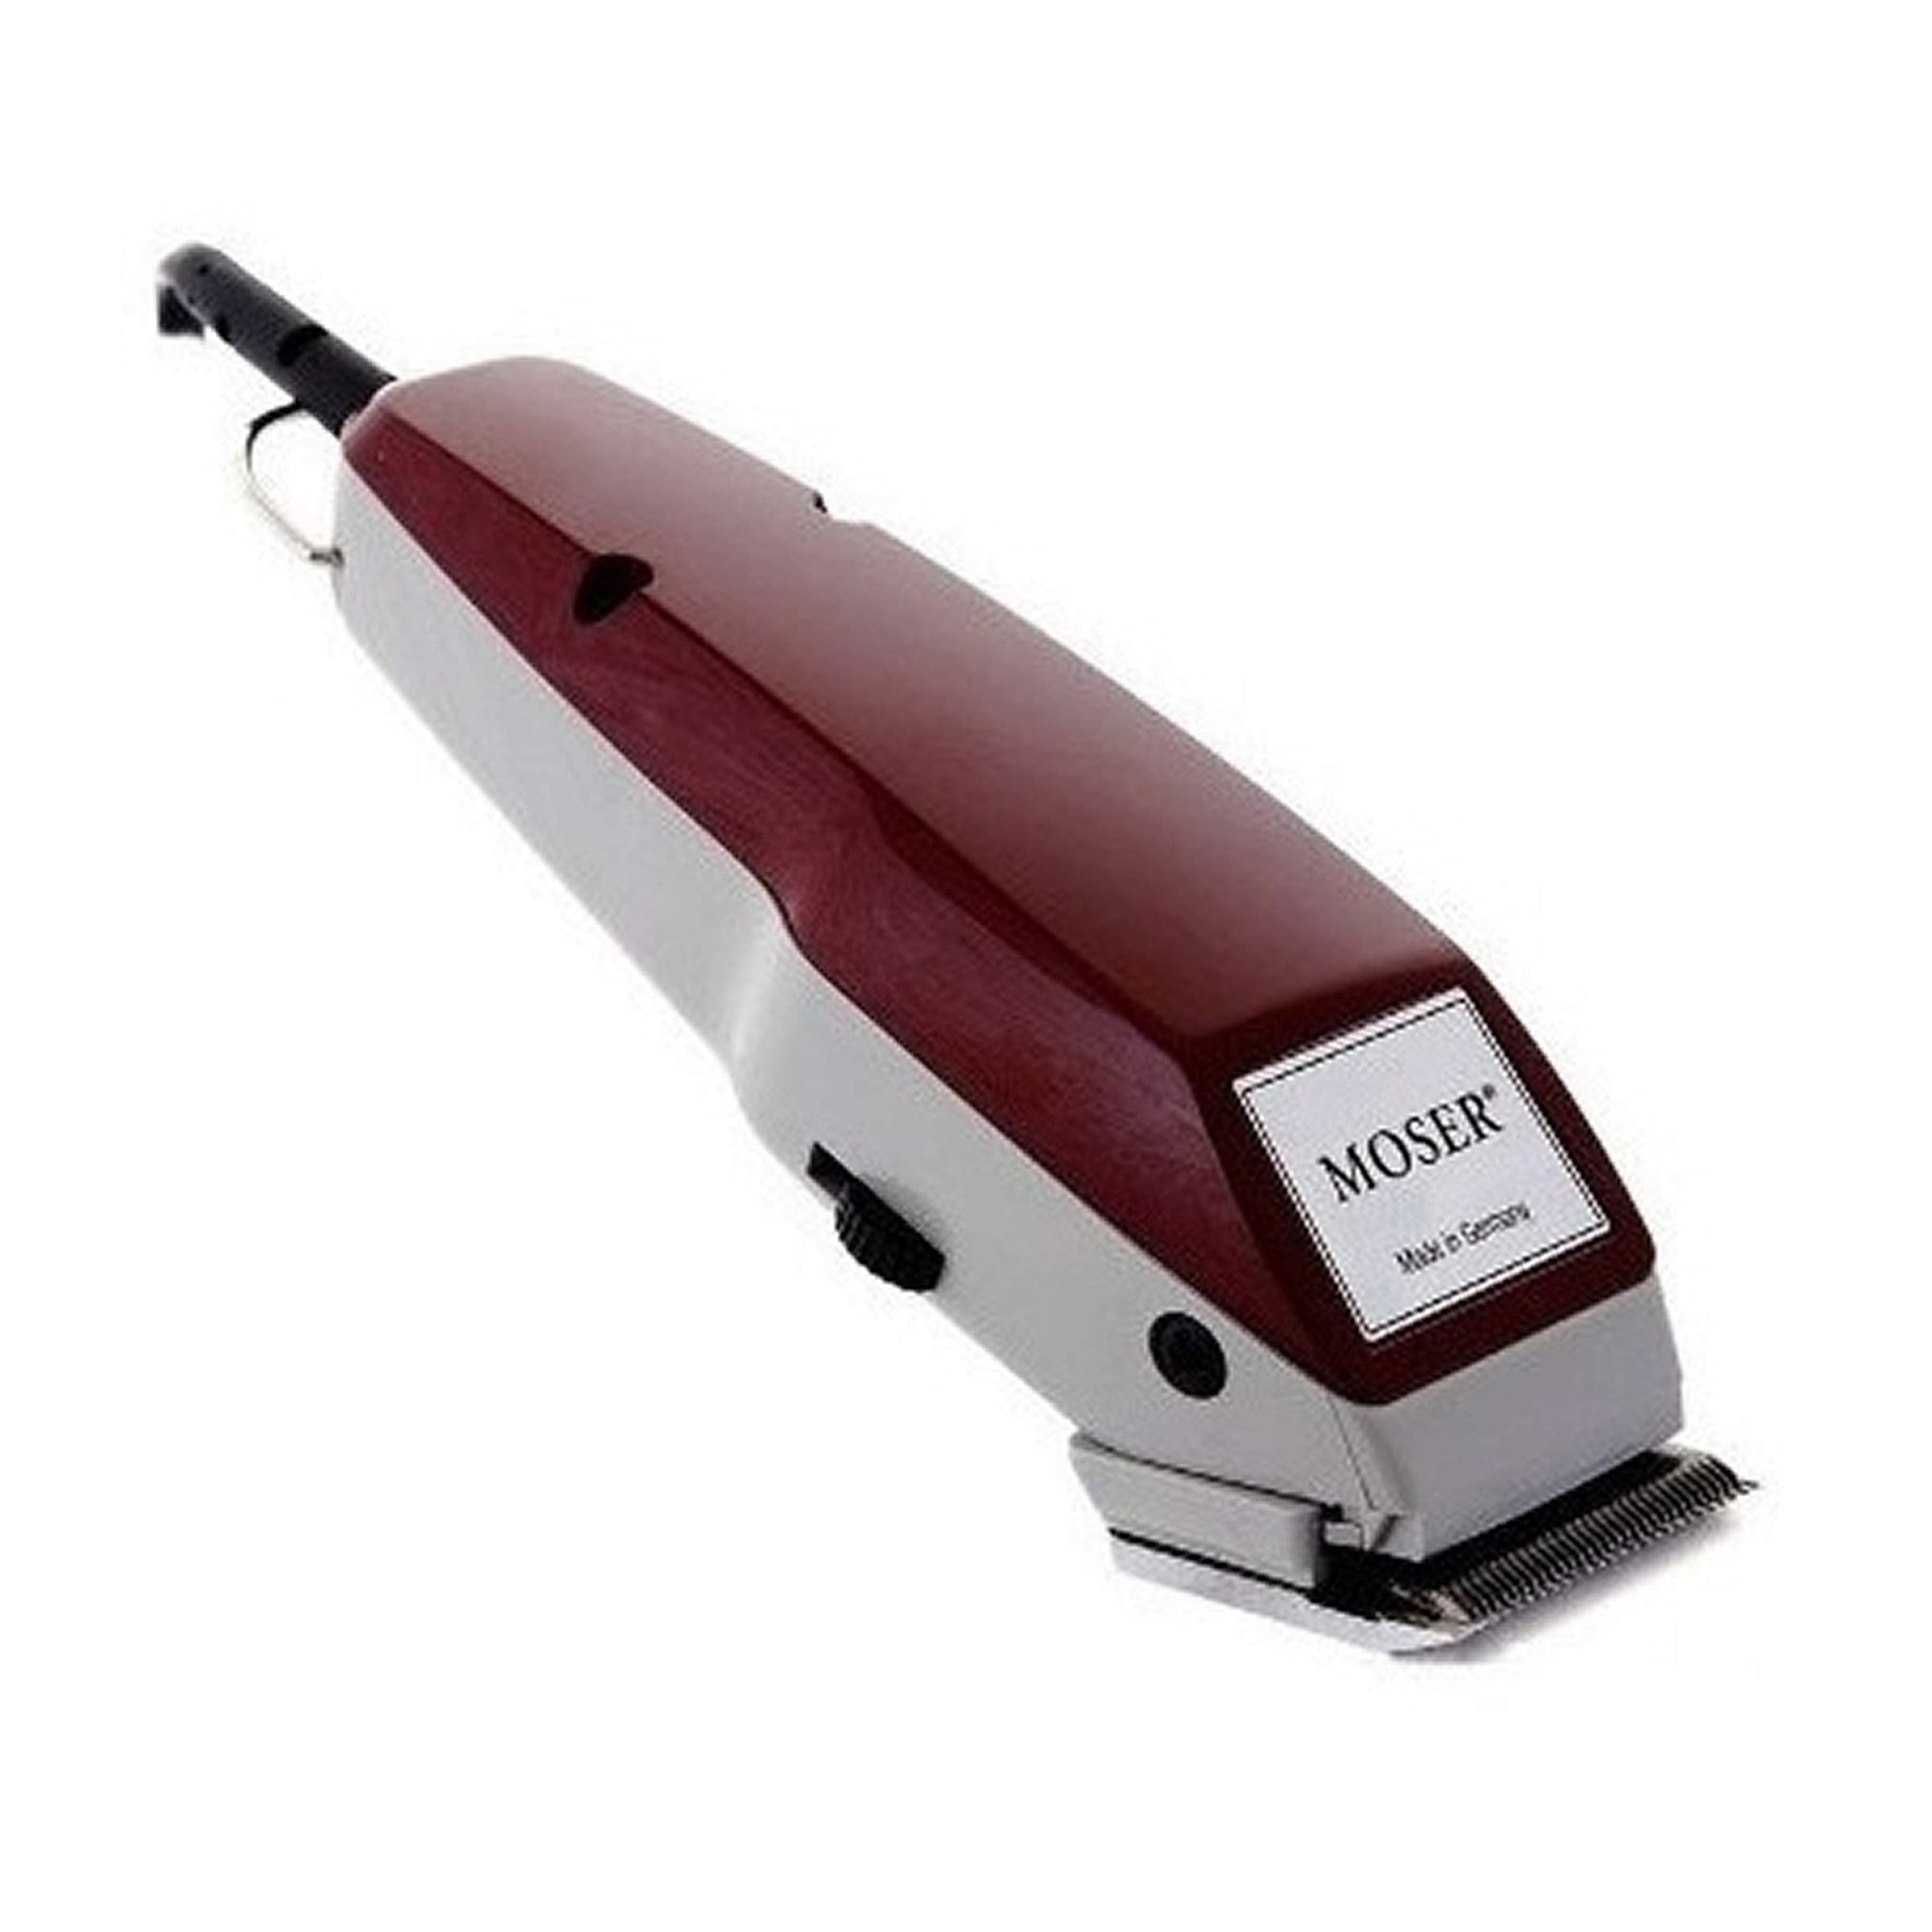 Moser 1400-0150, Professional Corded Hair Clipper, Burgandy (Pack Of 1)